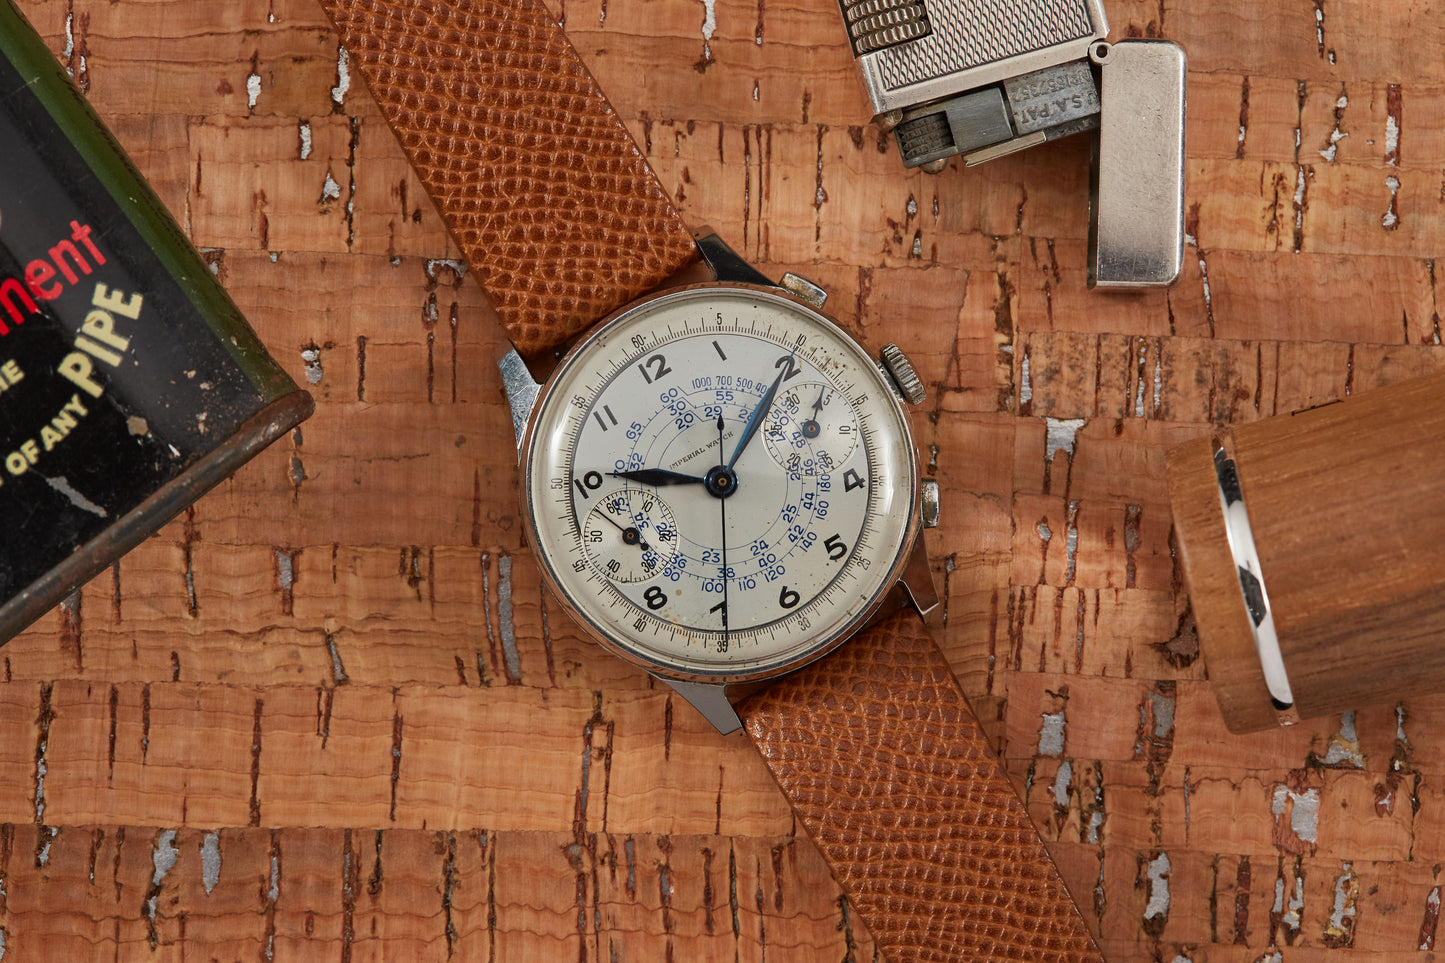 Imperial Watch Oversized Chronograph